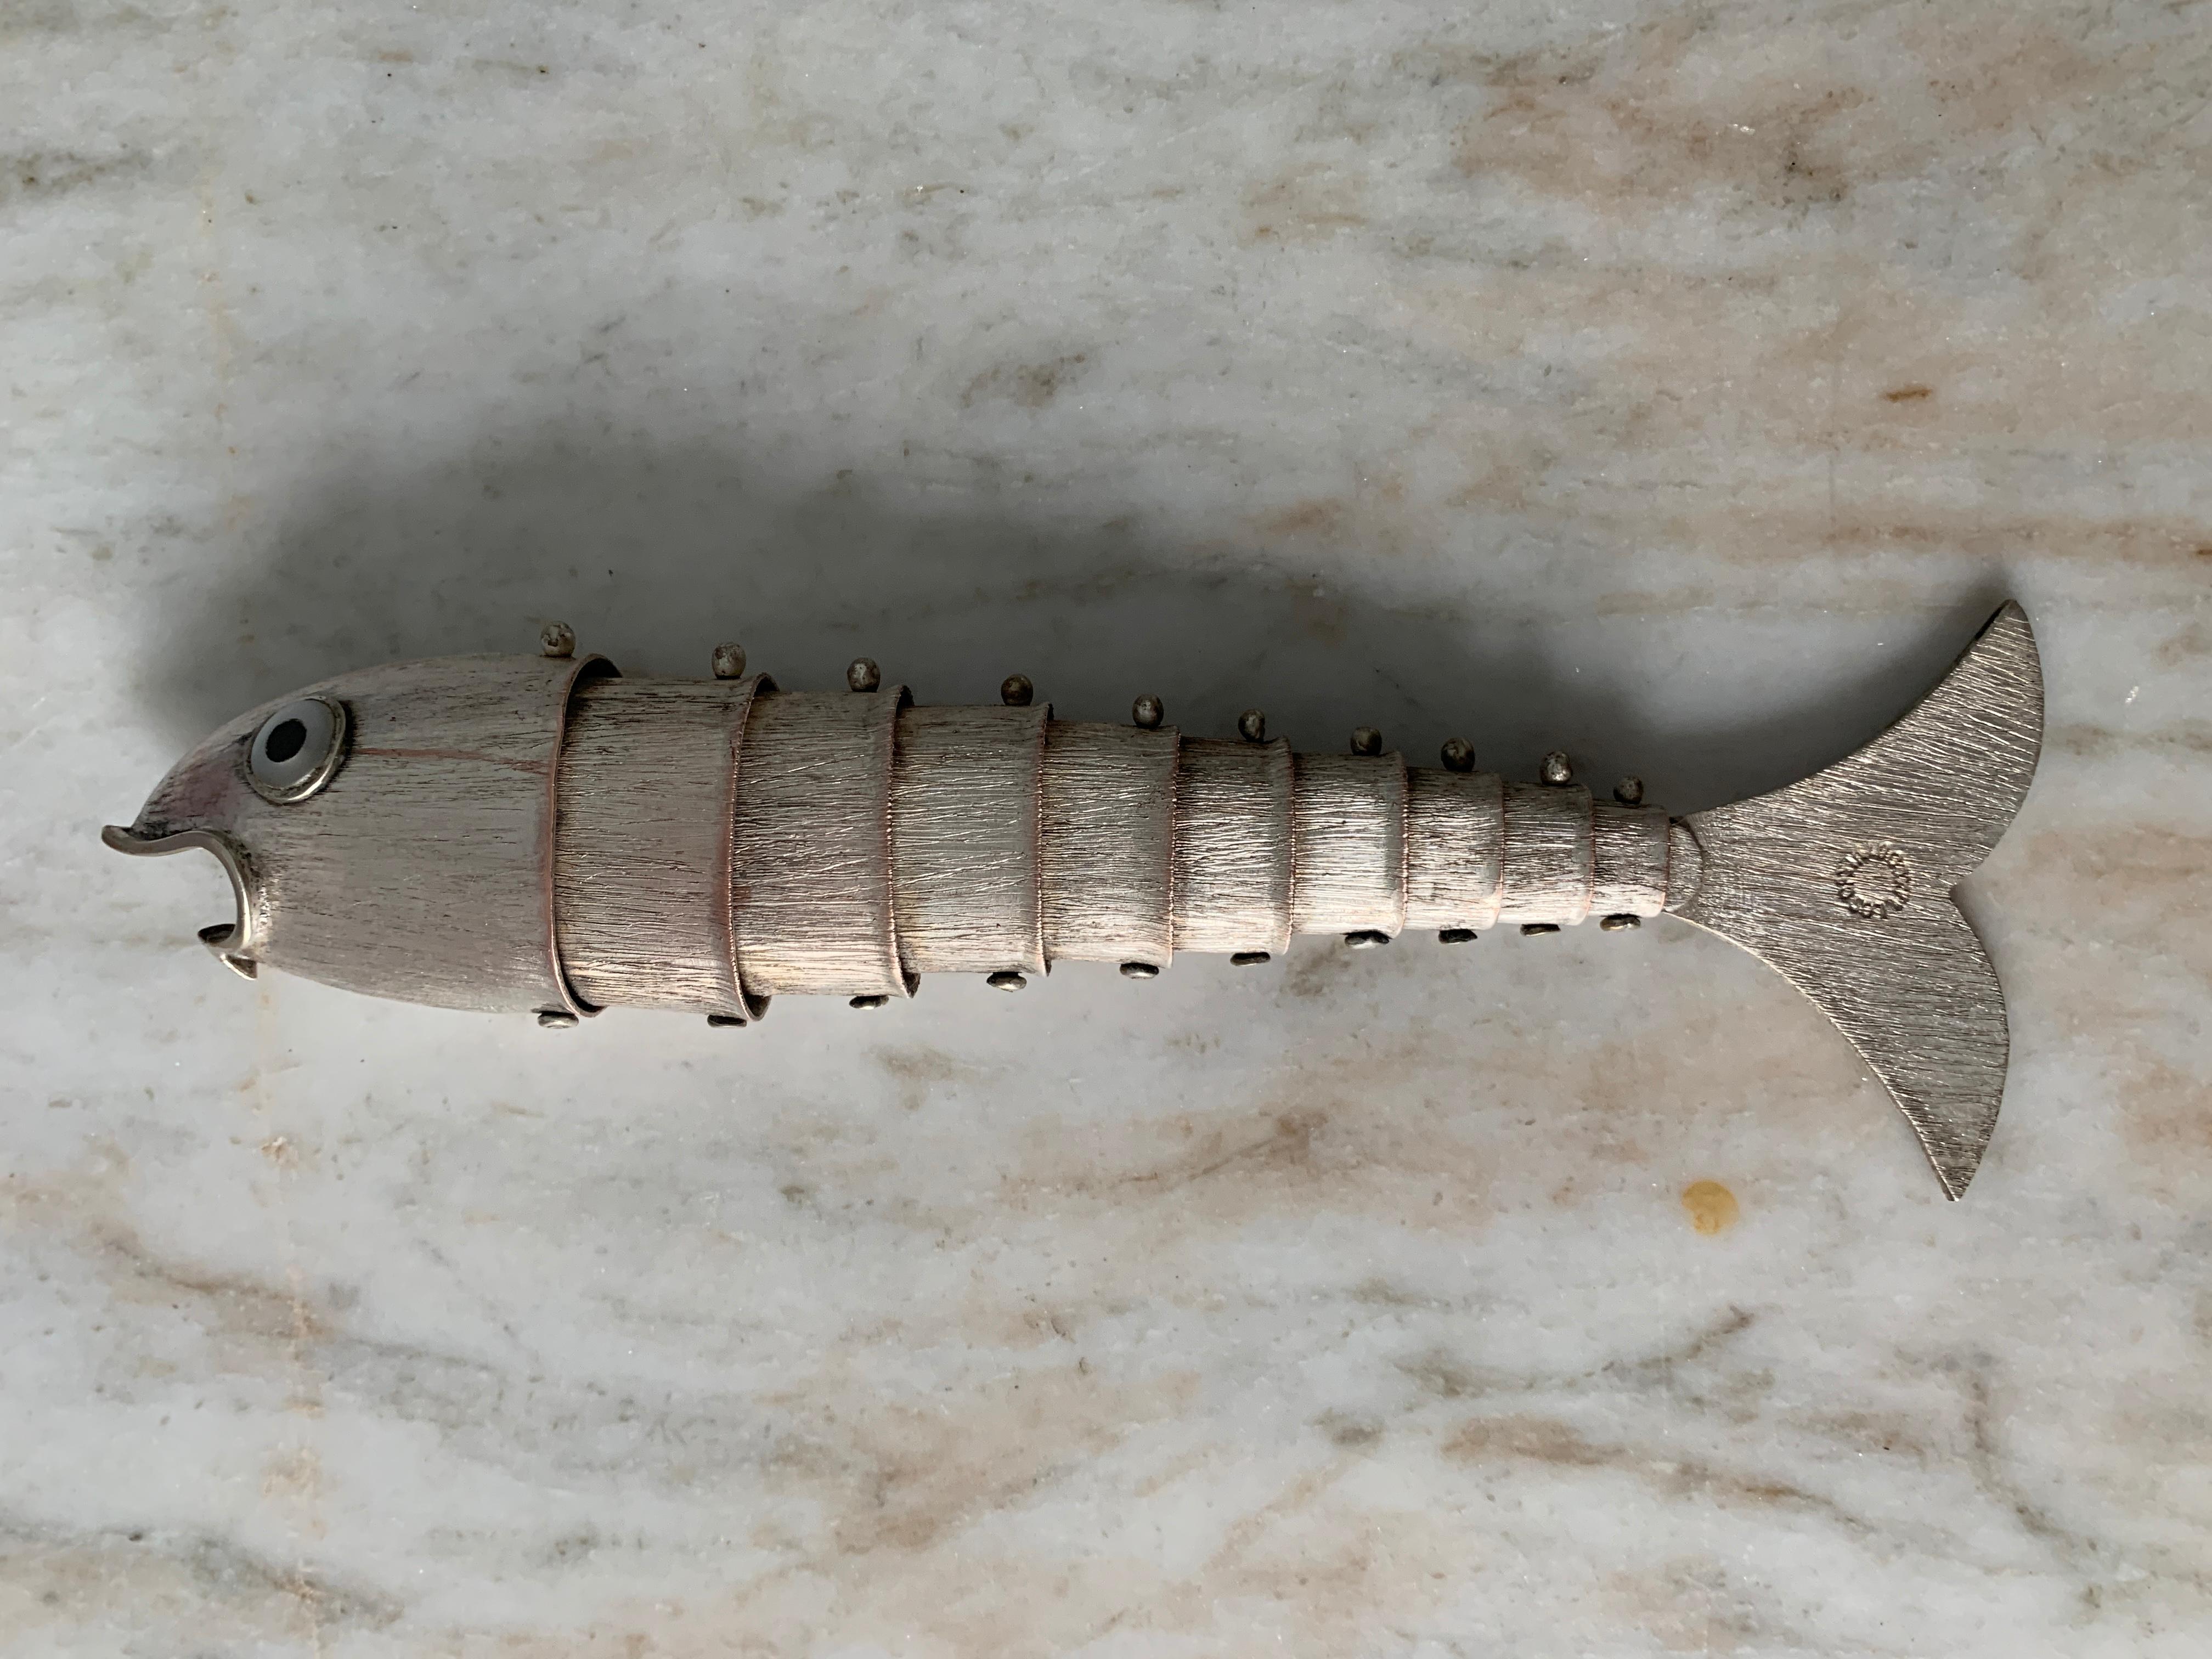 A unique and rare Los Castillo Articulated metal fish bottle opener. The piece is well suited for the serious bar and especially those that have a sophisticated midcentury theme. The fish were designed to stand on edge, which is a novel addition to